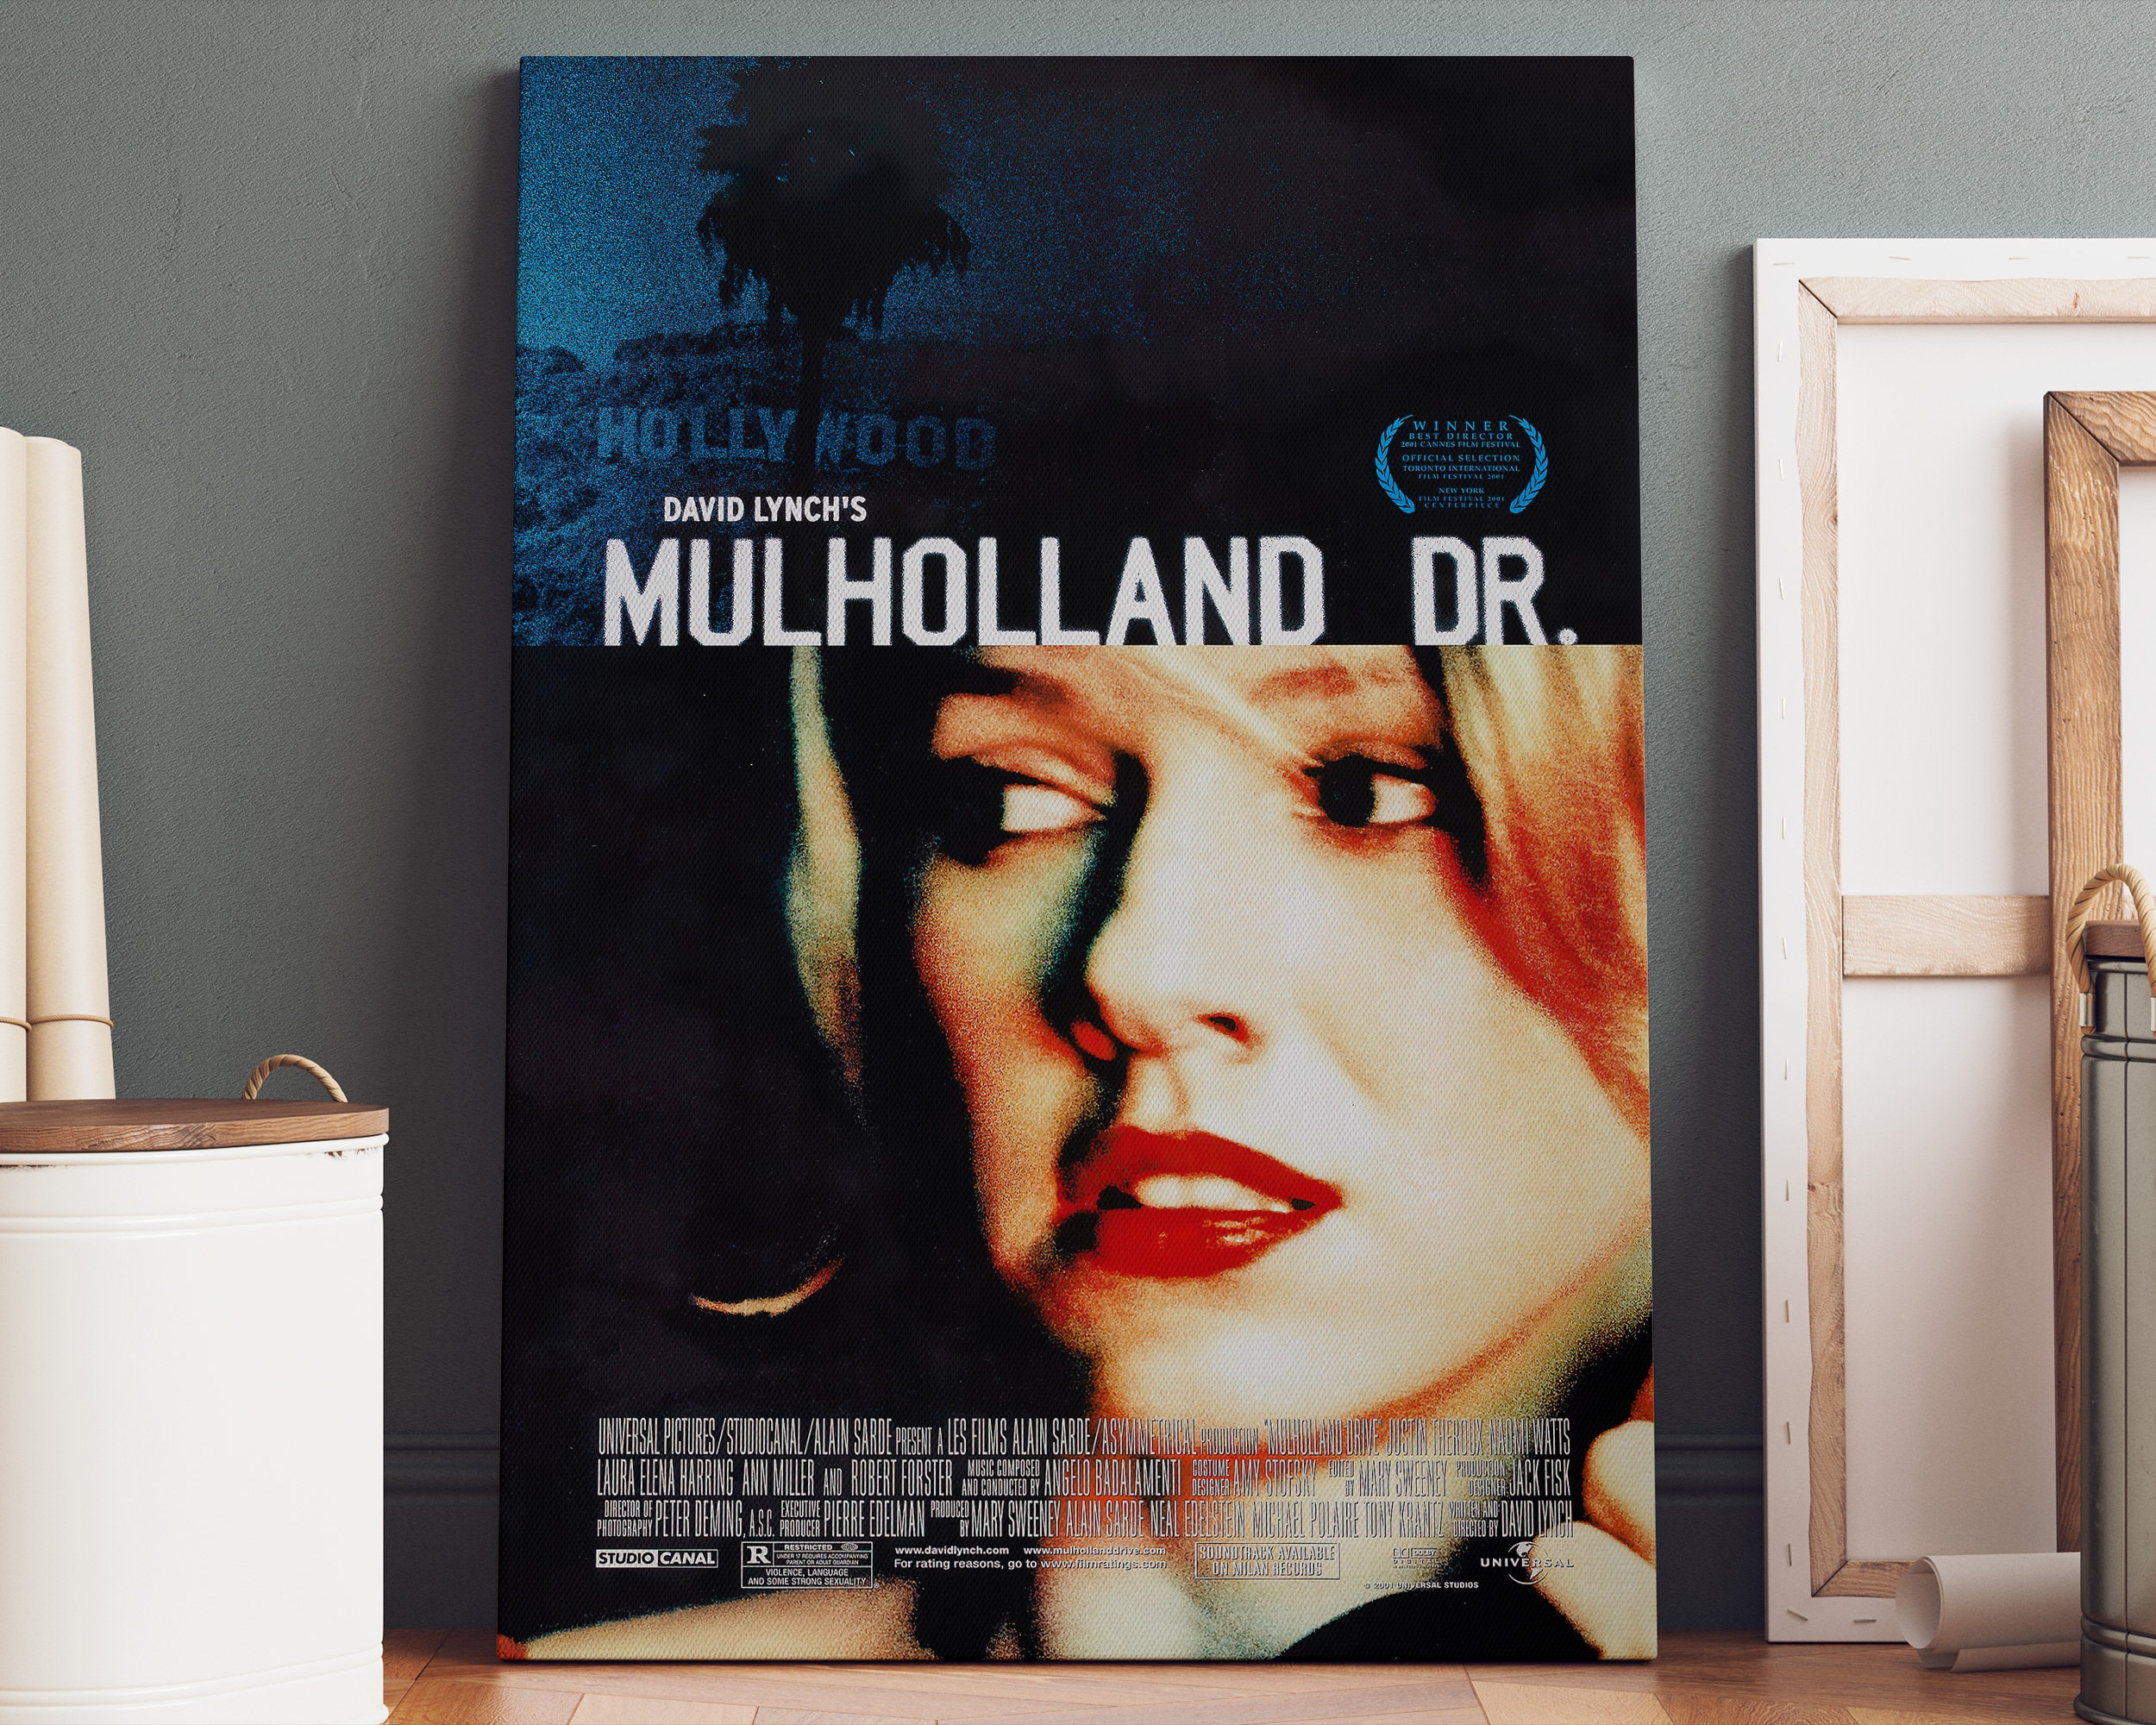  OFITIN Mulholland Drive Movie Vintage Art Poster Canvas Art  Poster and Wall Art Picture Print Modern Family bedroom Decor Posters  08x12inch(20x30cm): Posters & Prints